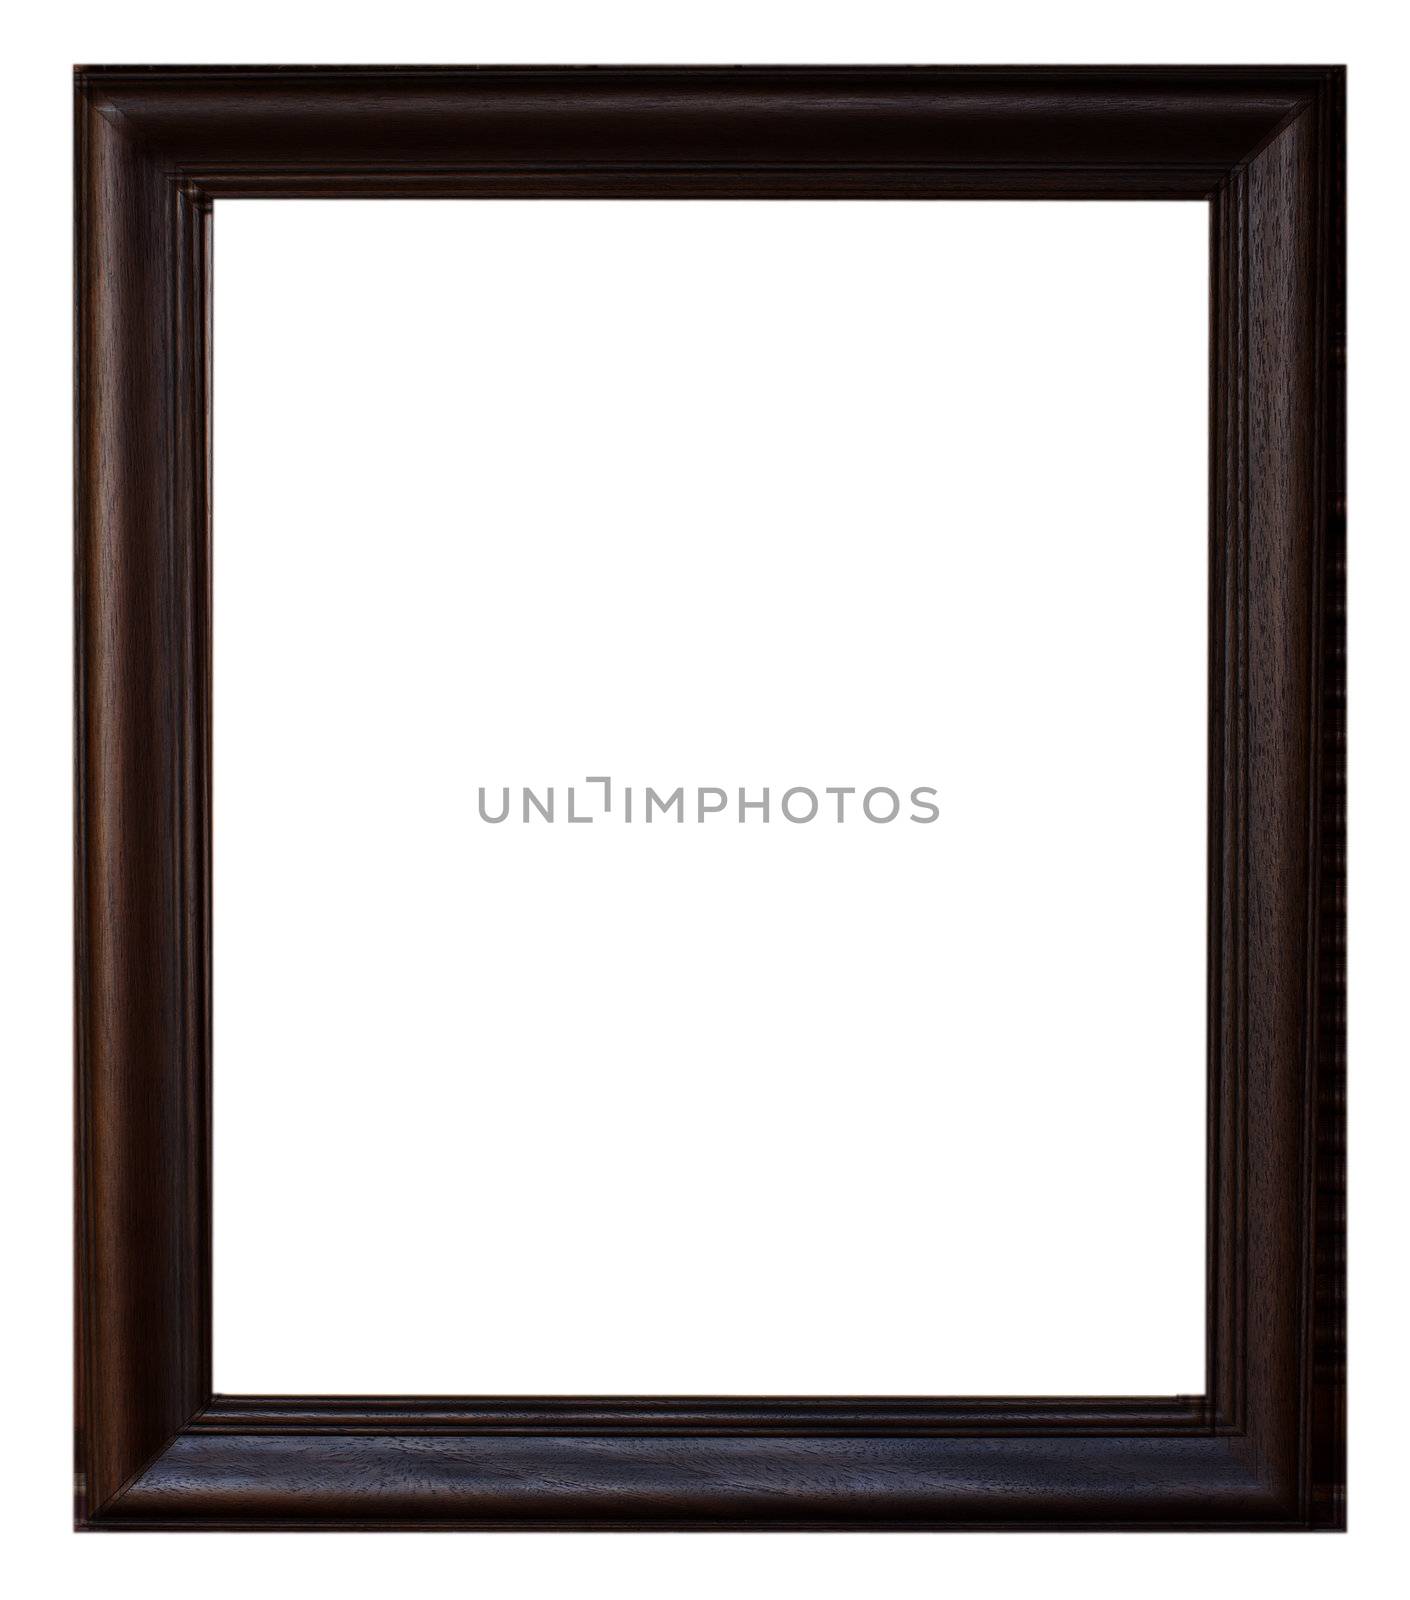 Black wooden picture frame isolated on white background.